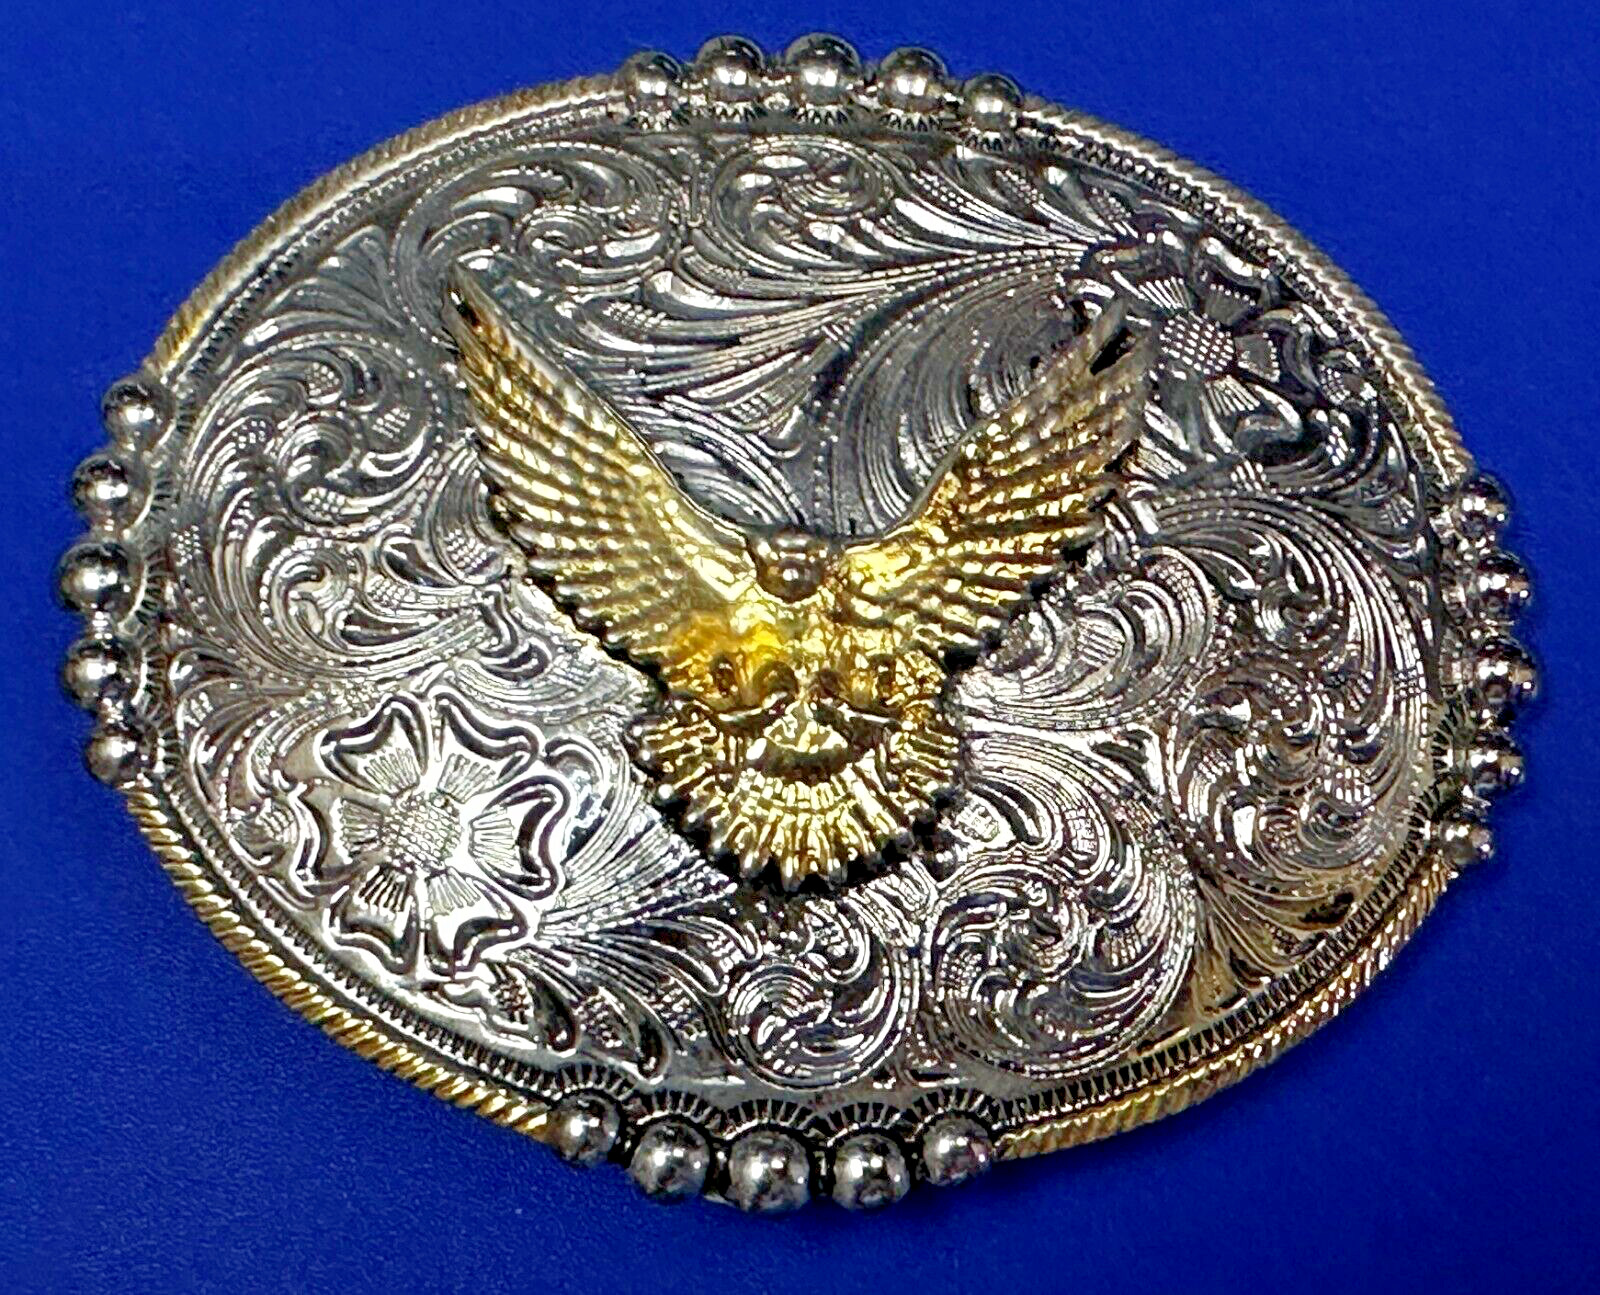 American Bald Eagle - Coming At Ya - Unique Western Two Tone Belt Buckle